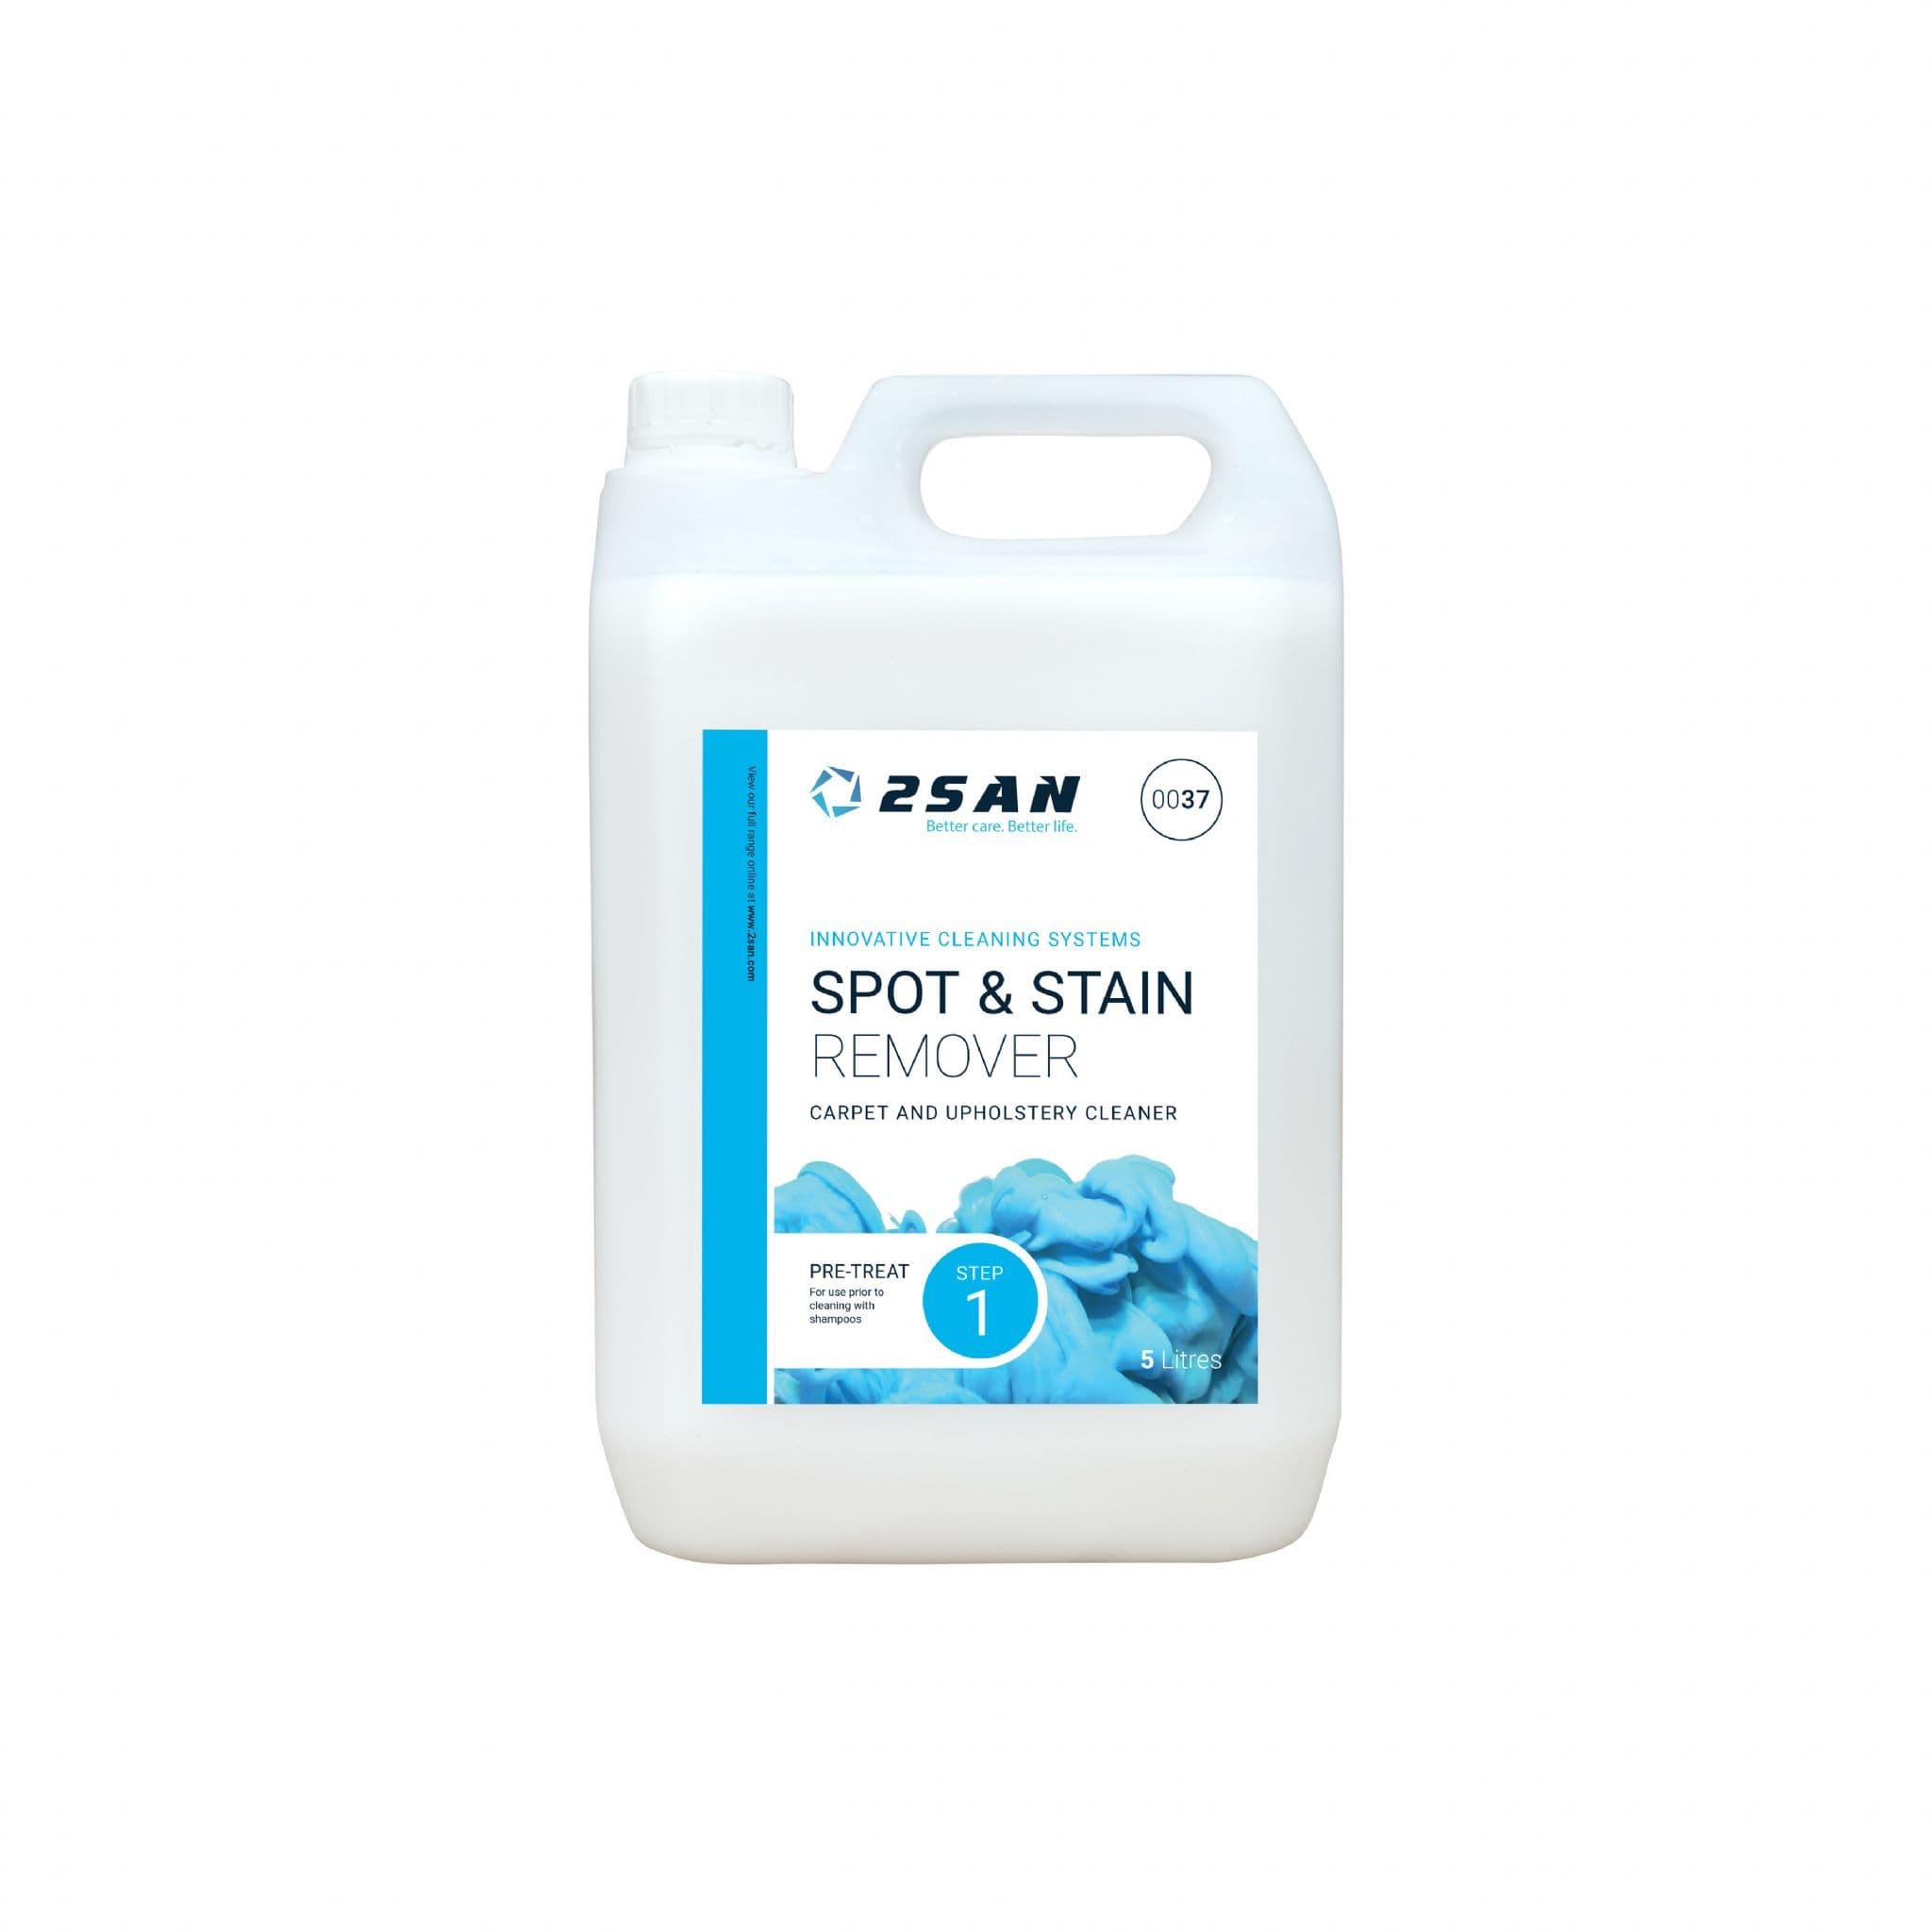 2SAN (Craftex) Spot & Stain Remover 5L 0037